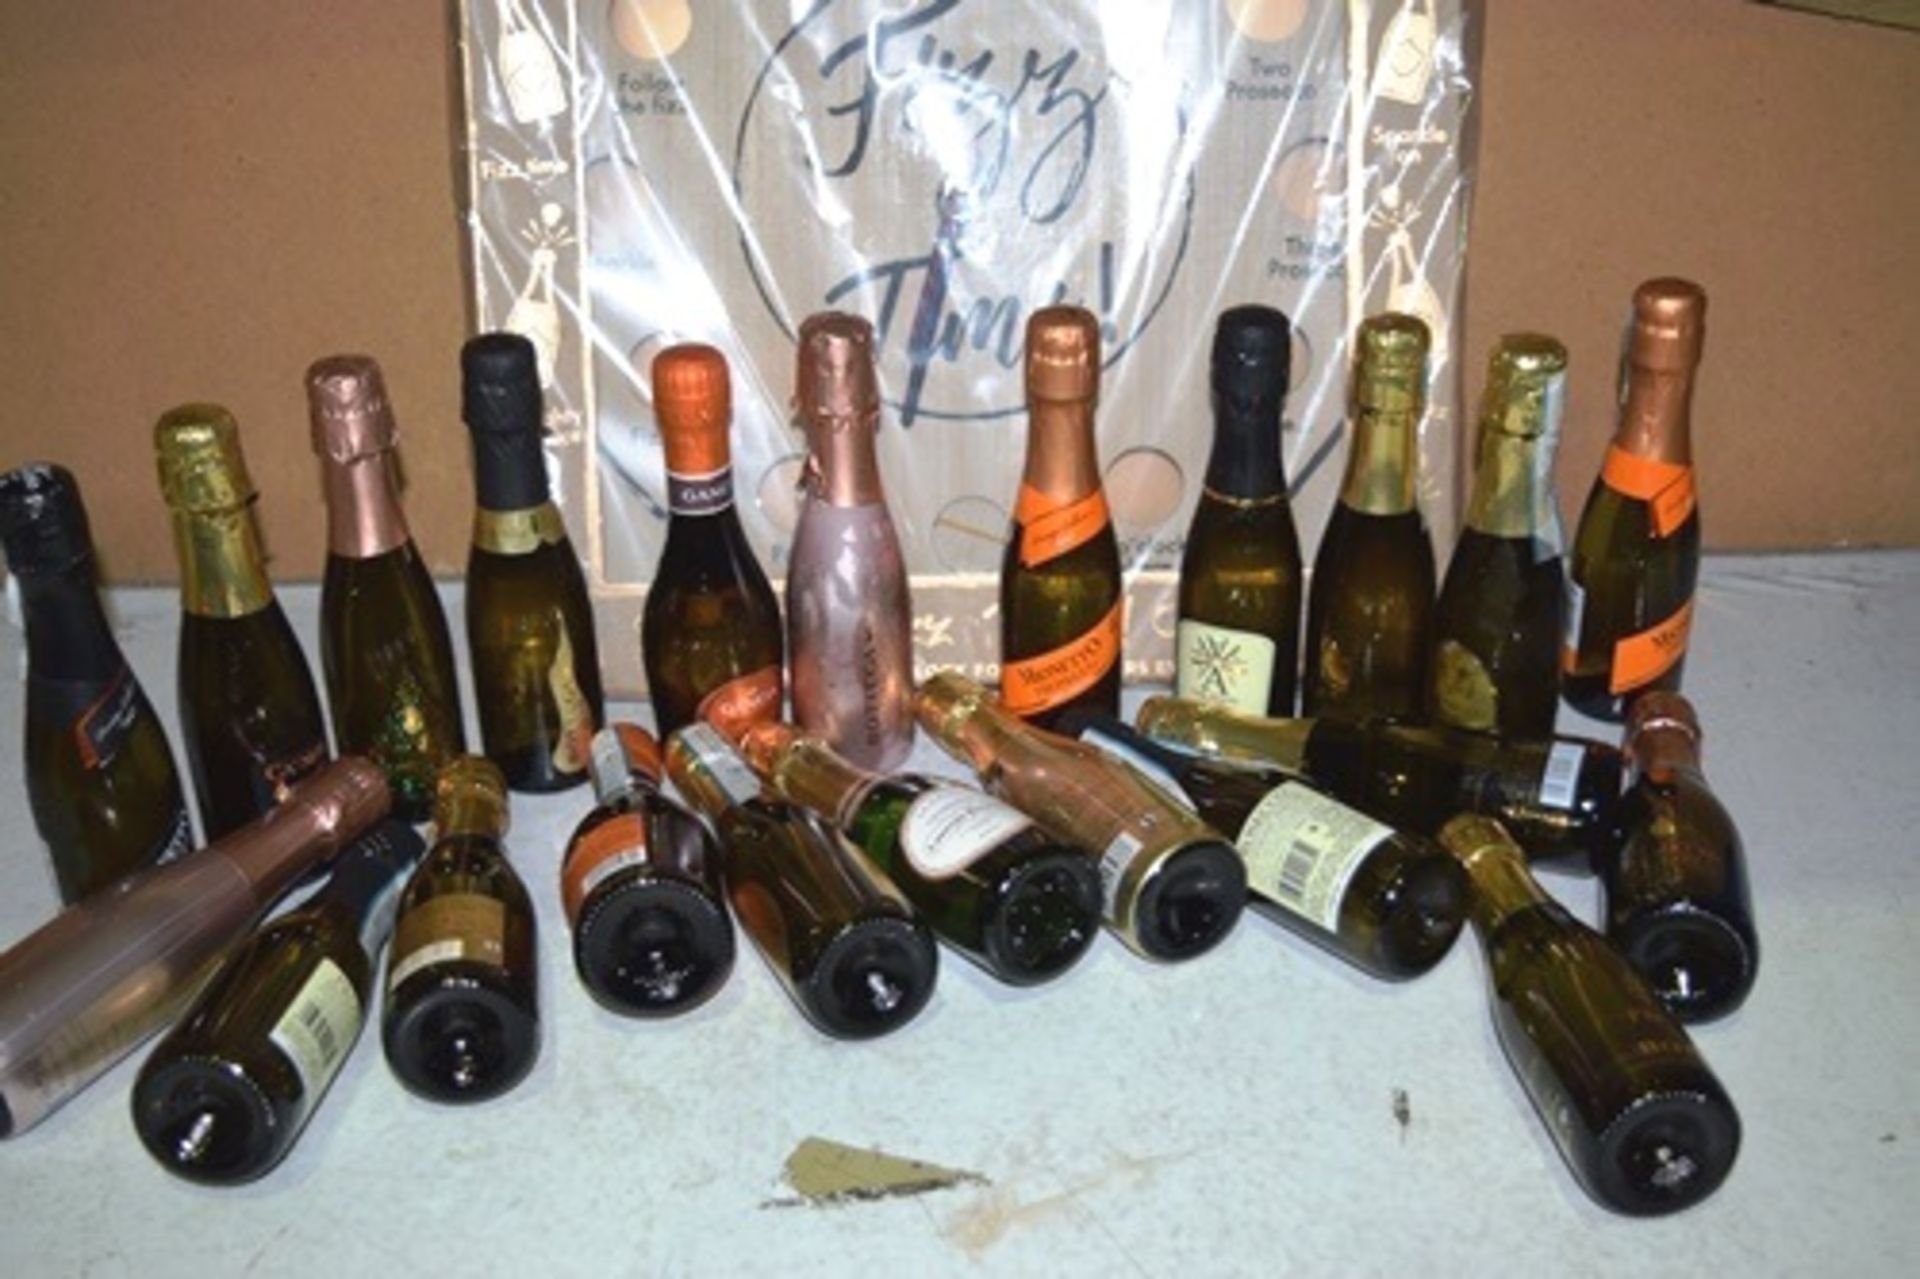 1 x Tick Tock Alco' Clock together with 22 x 20cl/200ml bottles of assorted champagne and - Image 2 of 2